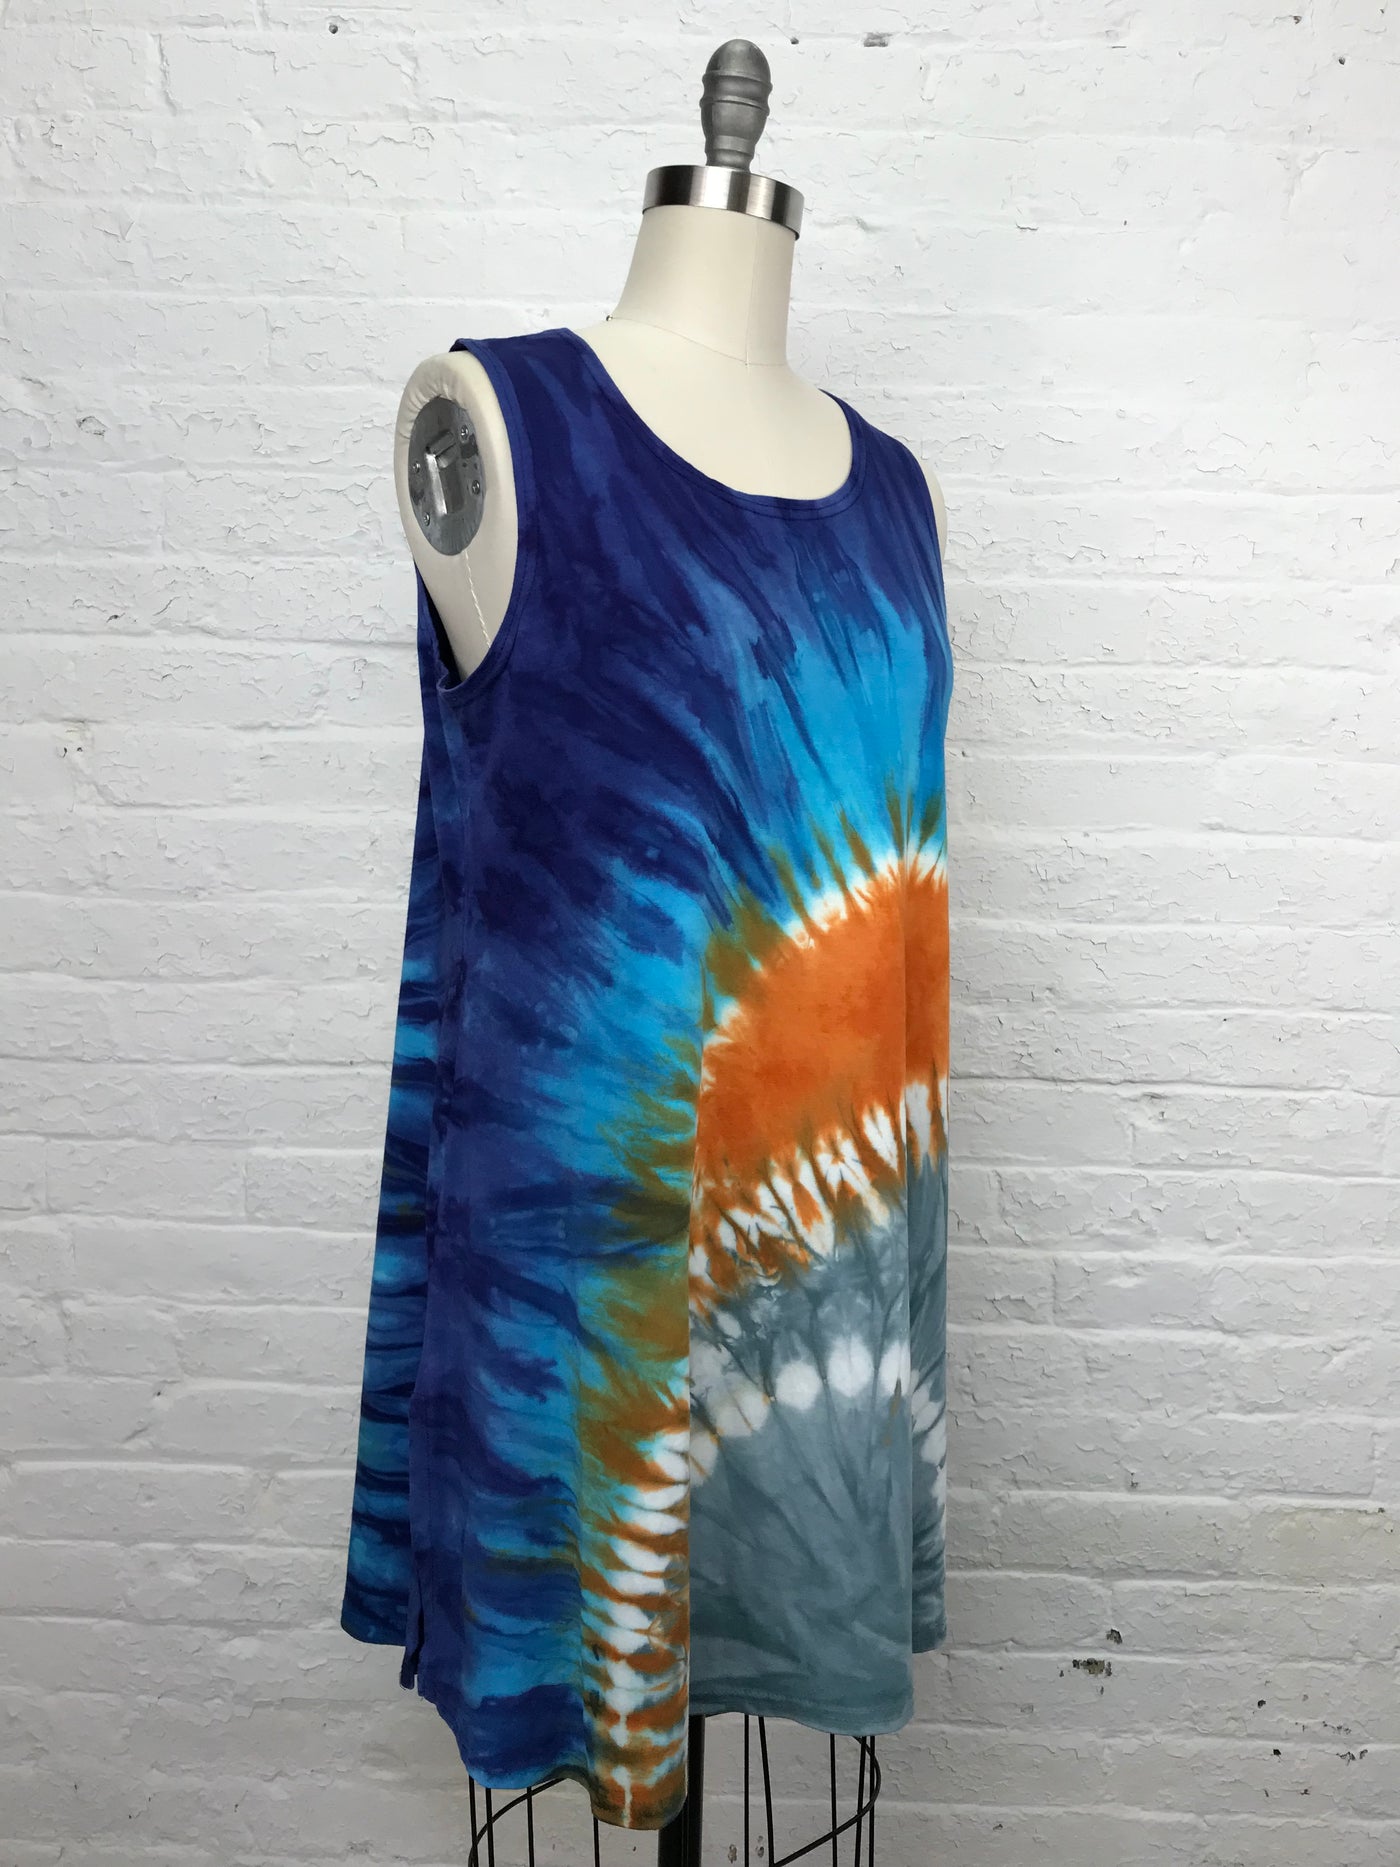 Eileen Mini Tank Tunic in Sunrise Over Clouds - right side view